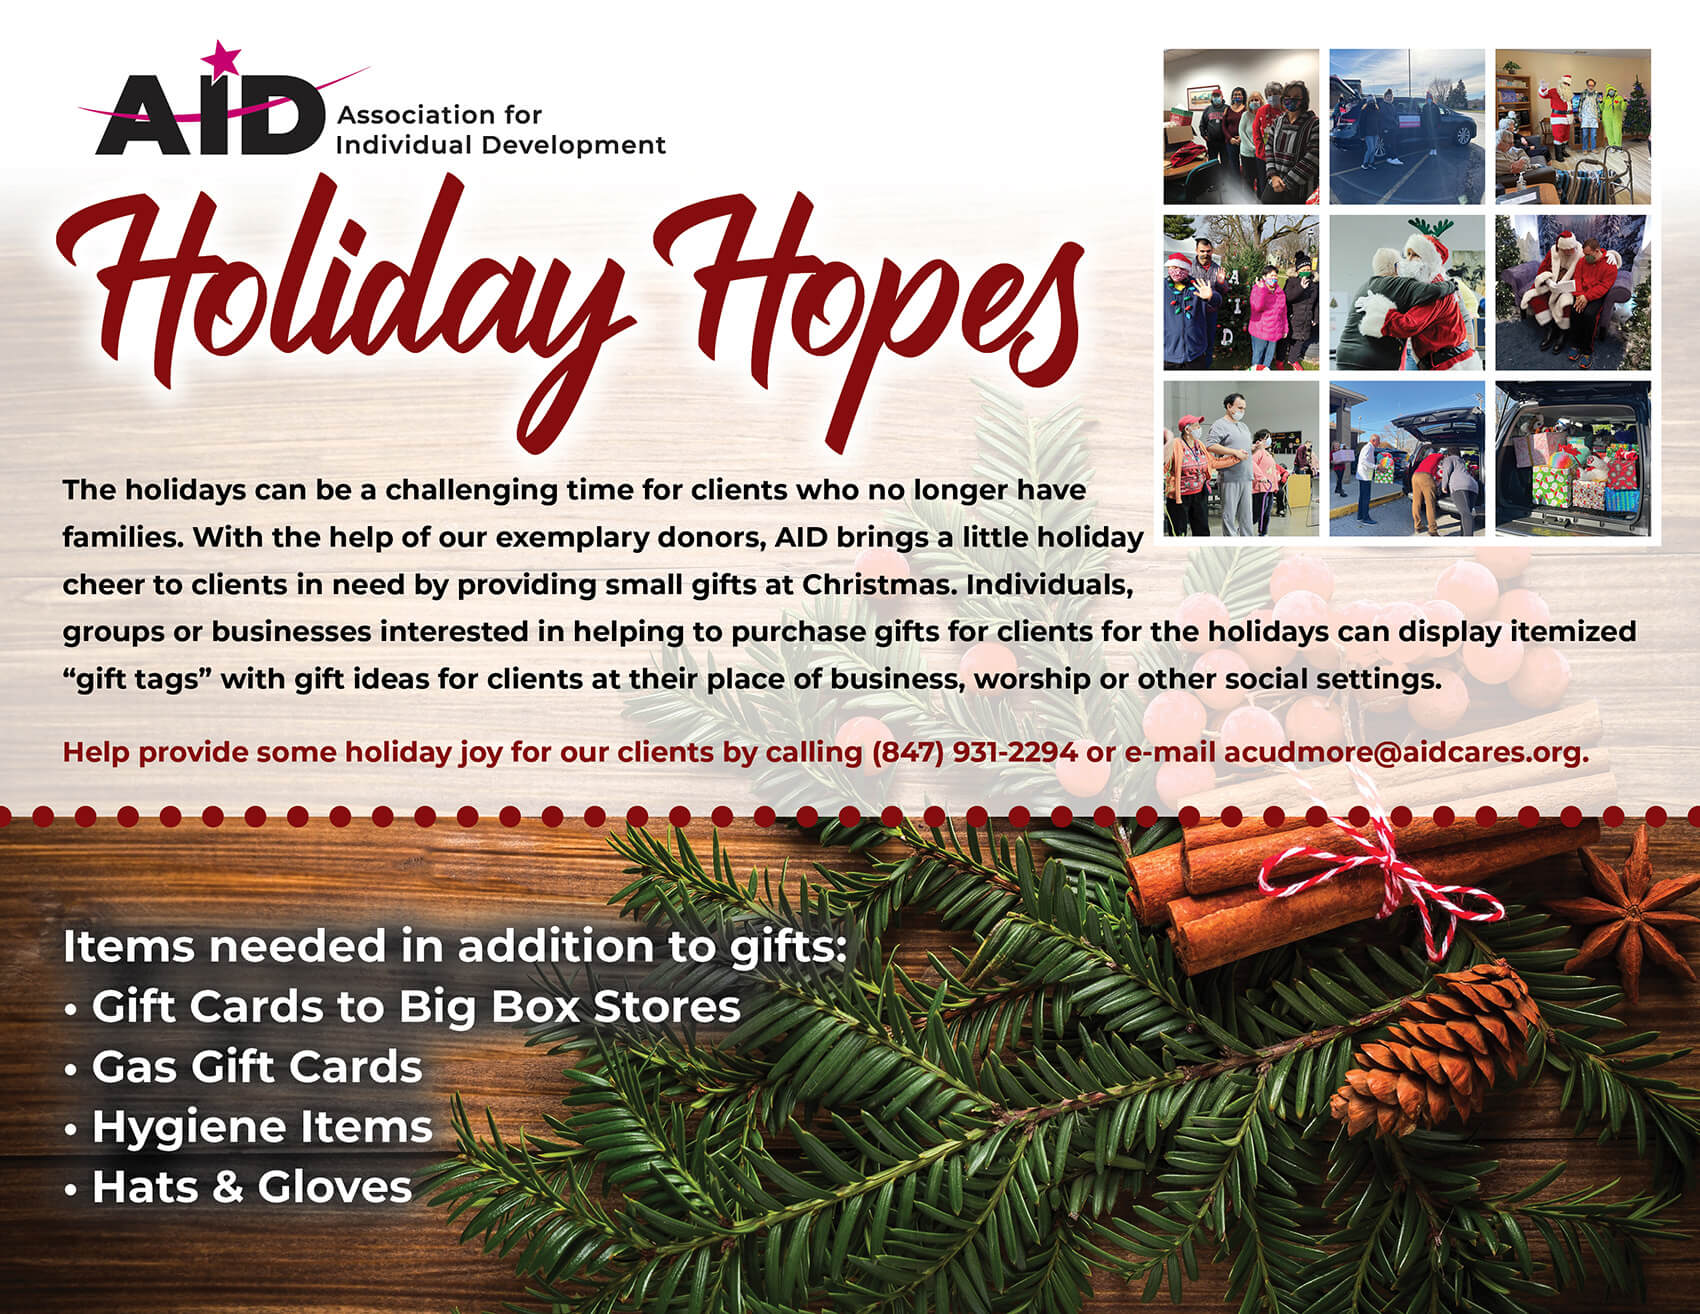 Holiday Hopes The holidays can be a challenging time for clients who no longer have families. With the help of our exemplary donors, AID brings a little holiday cheer to clients in need by providing small gifts at Christmas. Individuals, groups or businesses interested in helping to purchase gifts for clients for the holidays can display itemized “gift tags” with gift ideas for clients at their place of business, worship or other social settings. Help provide some holiday joy for our clients by calling (847) 931-2294 or e-mail acudmore@aidcares.org. Items needed in addition to gifts: • Gift Cards to Big Box Stores • Gas Gift Cards • Hygiene Items • Hats & Gloves